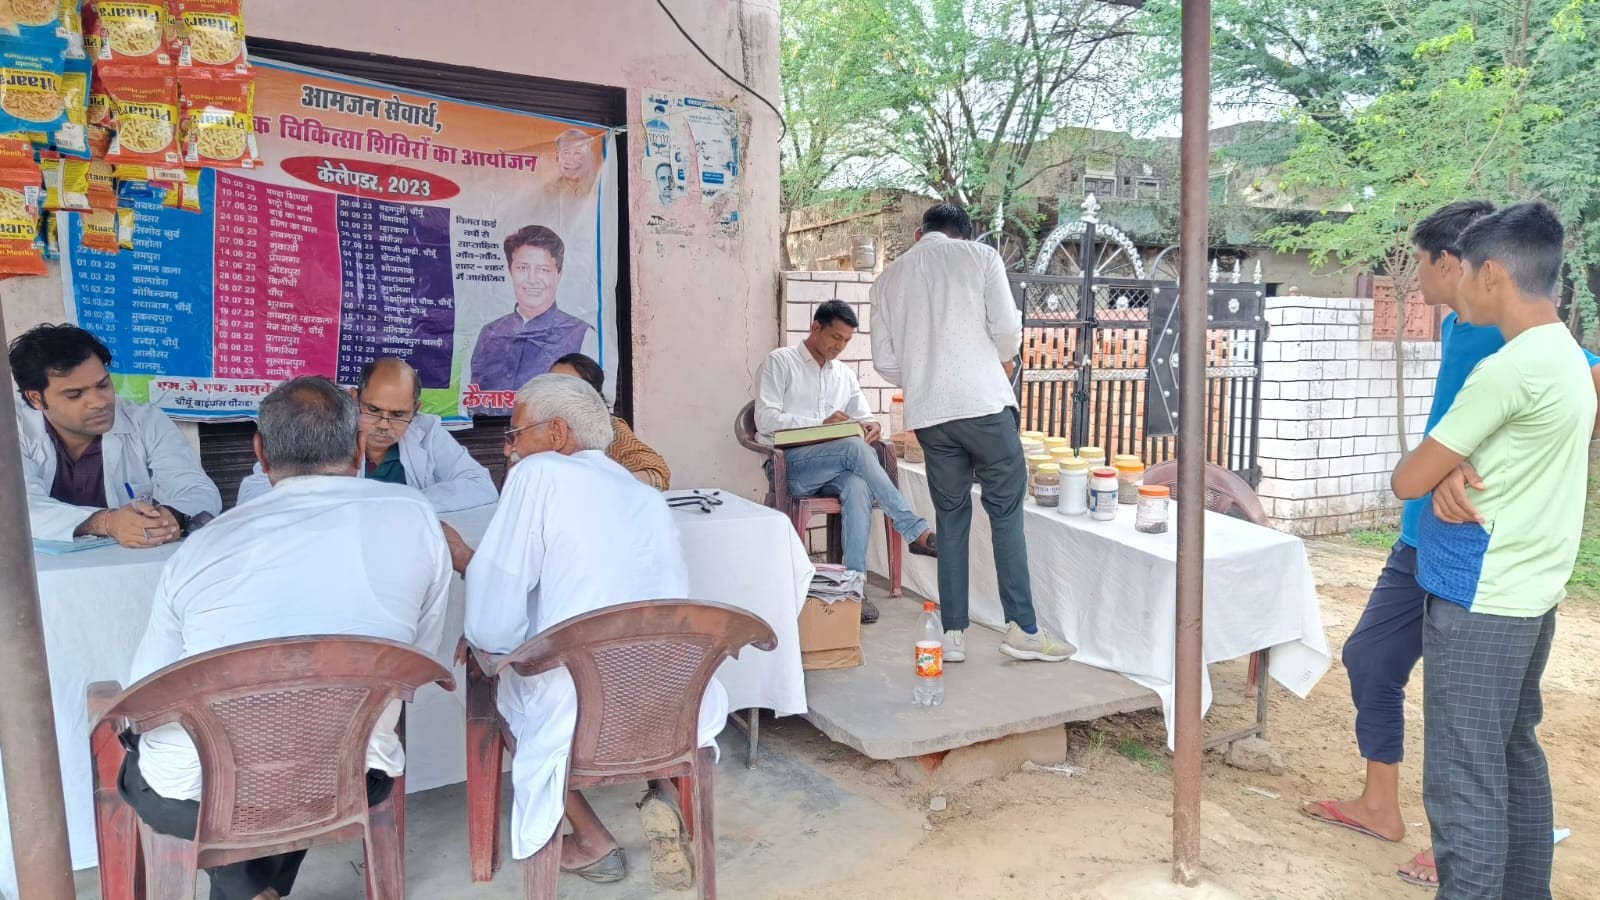 WEEKLY FREE MEDICAL CAMP ORGANIZED AT VILLAGE SABALPURA, CHOMU ON DATED 31 May 2023 PER SCHEDULE